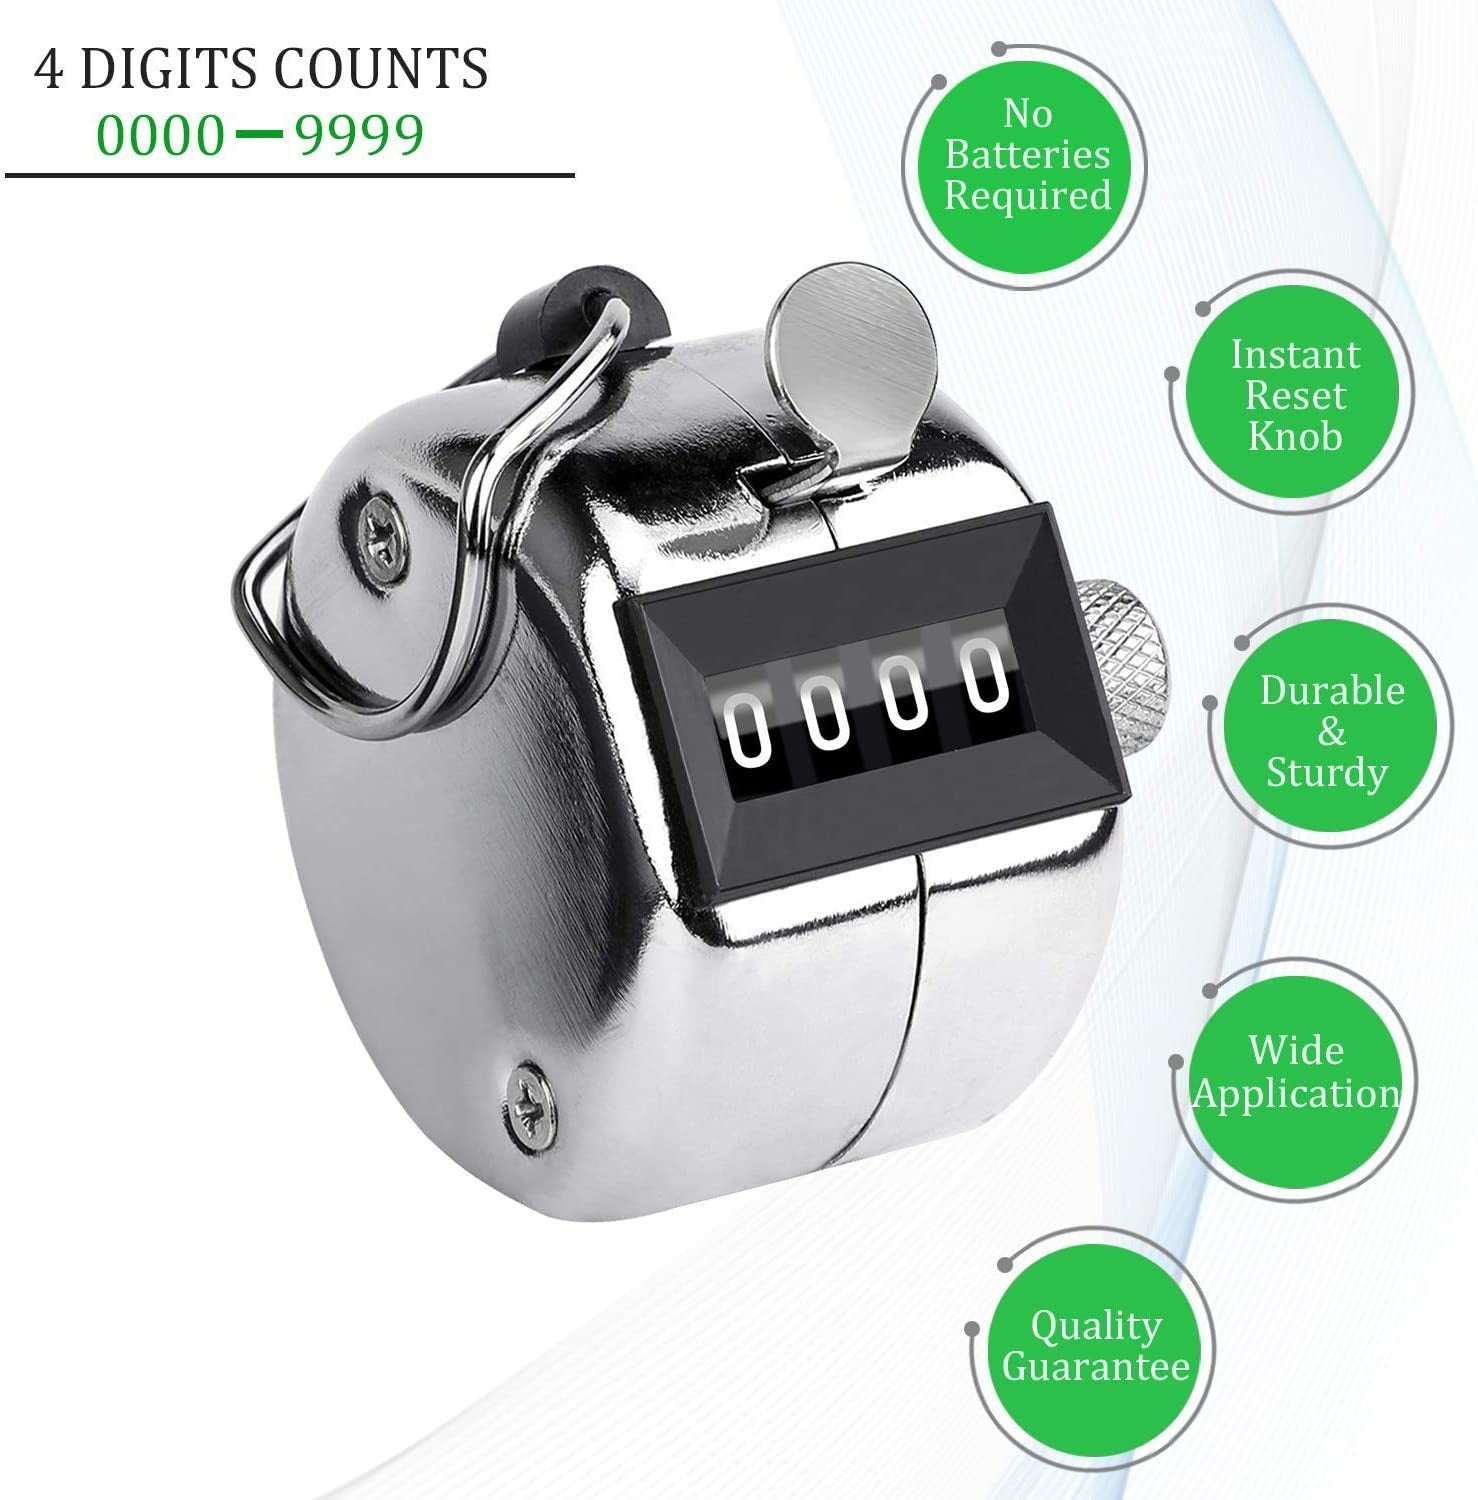 1550 4 Digits Hand Held Tally Counter Numbers Clicker DeoDap